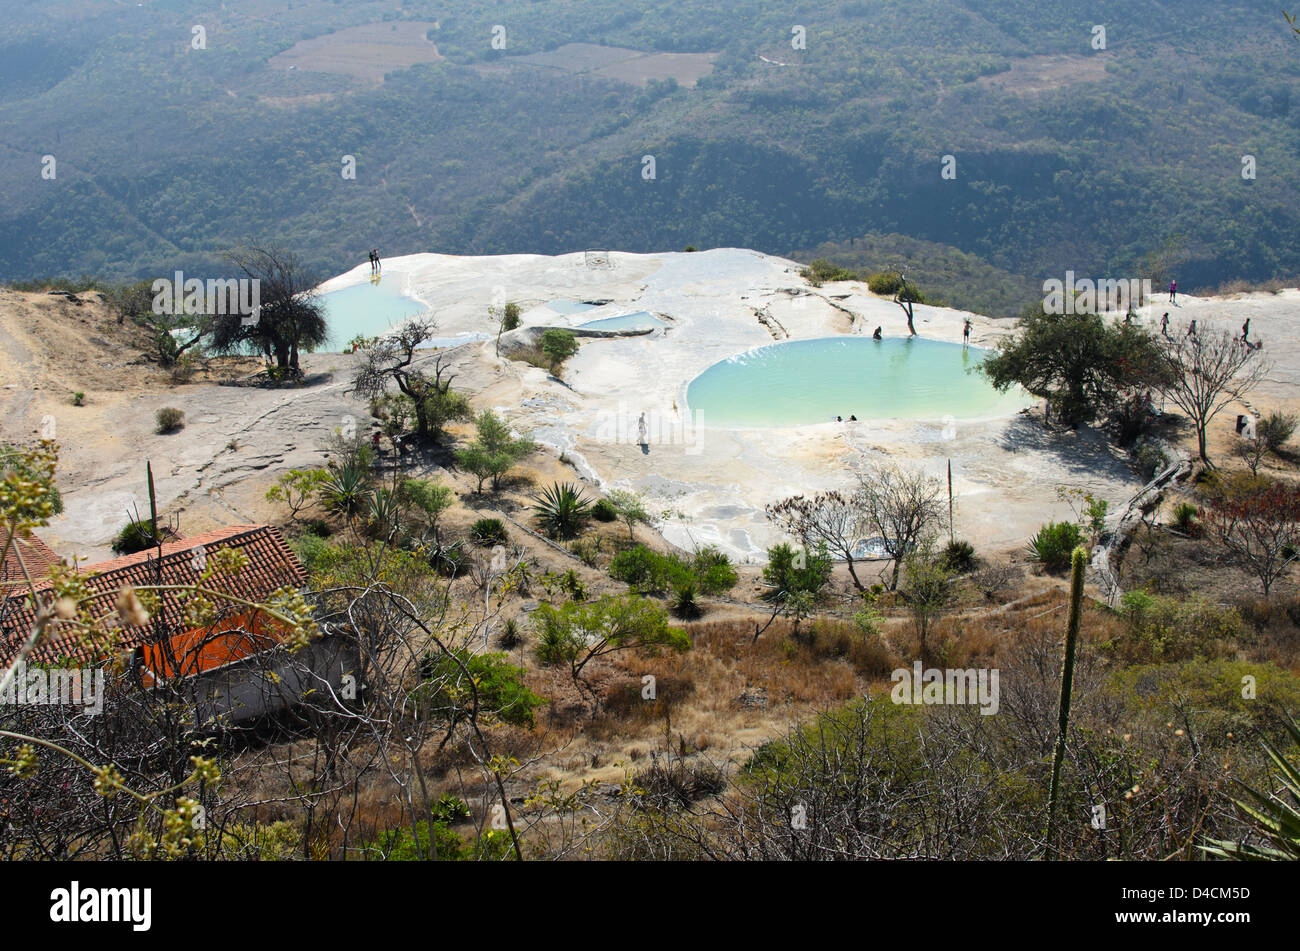 Calcium carbonate gives the water its aqua hue at Hierve el Agua mineral springs, Oaxaca, Mexico. Stock Photo